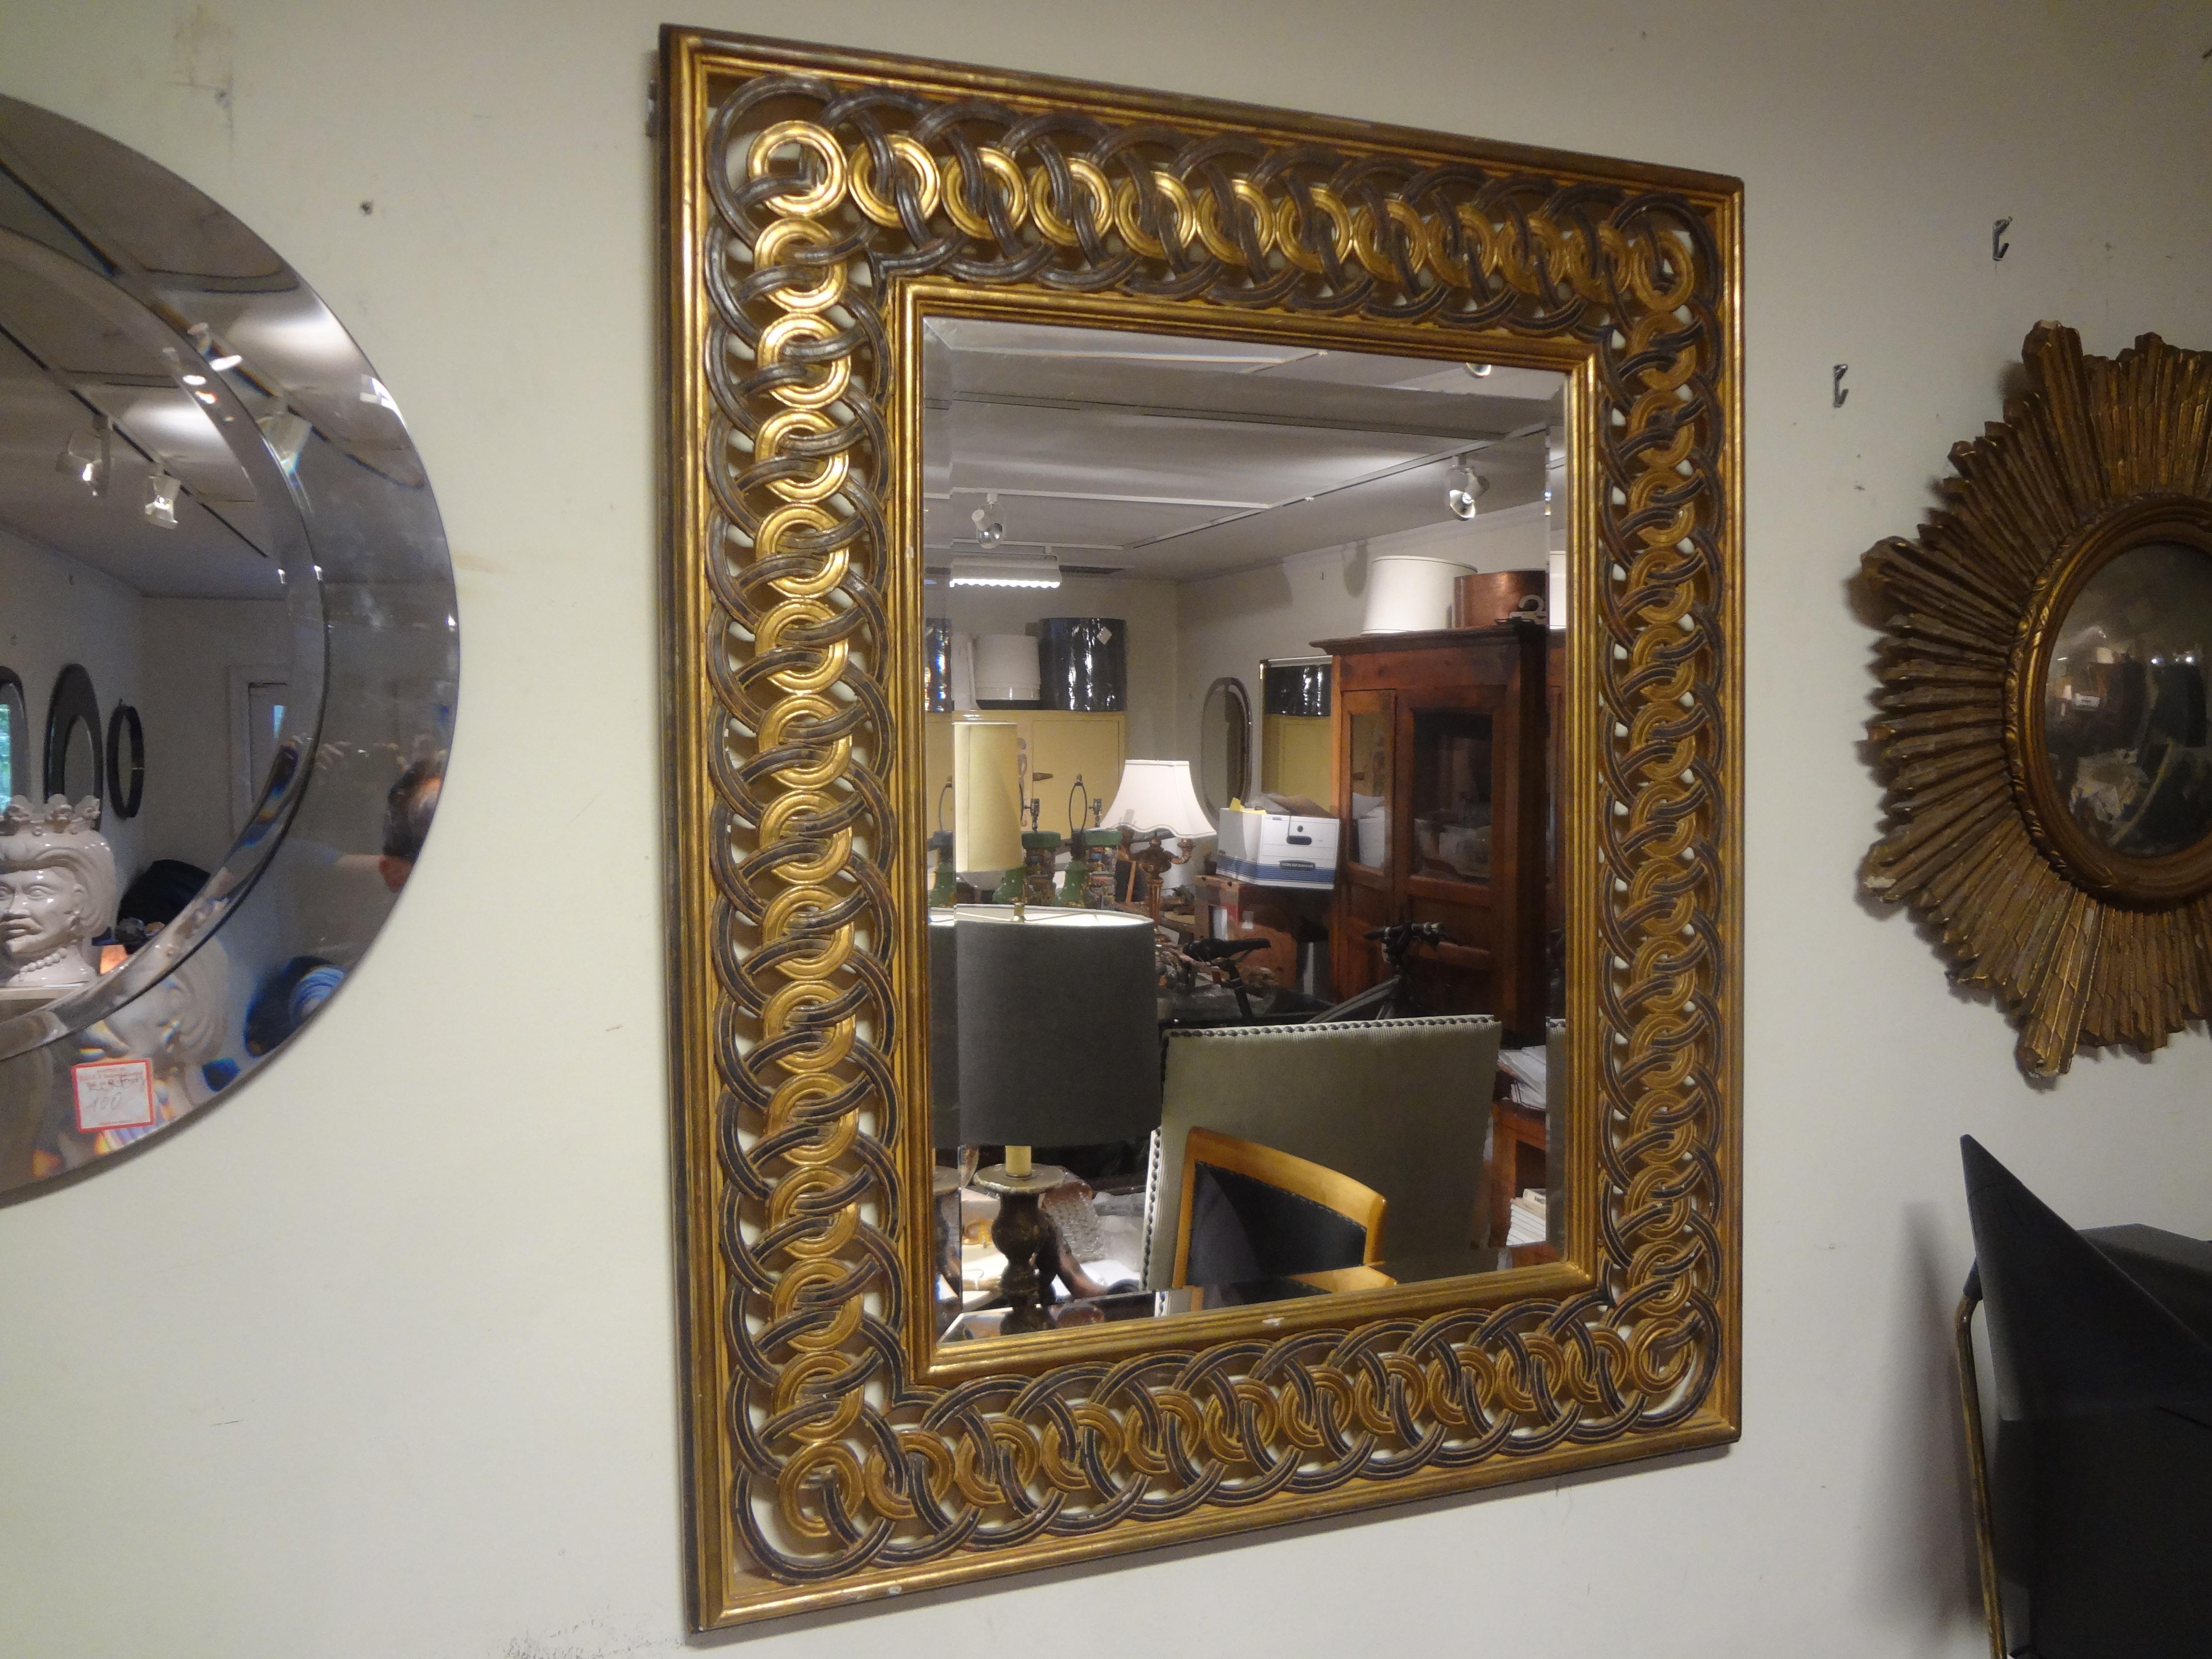 Italian painted and parcel gilt mirror.
This Italian Hollywood Regency painted and parcel gilt mirror has an interesting circular perimeter design with a beveled silver center.
Stunning.